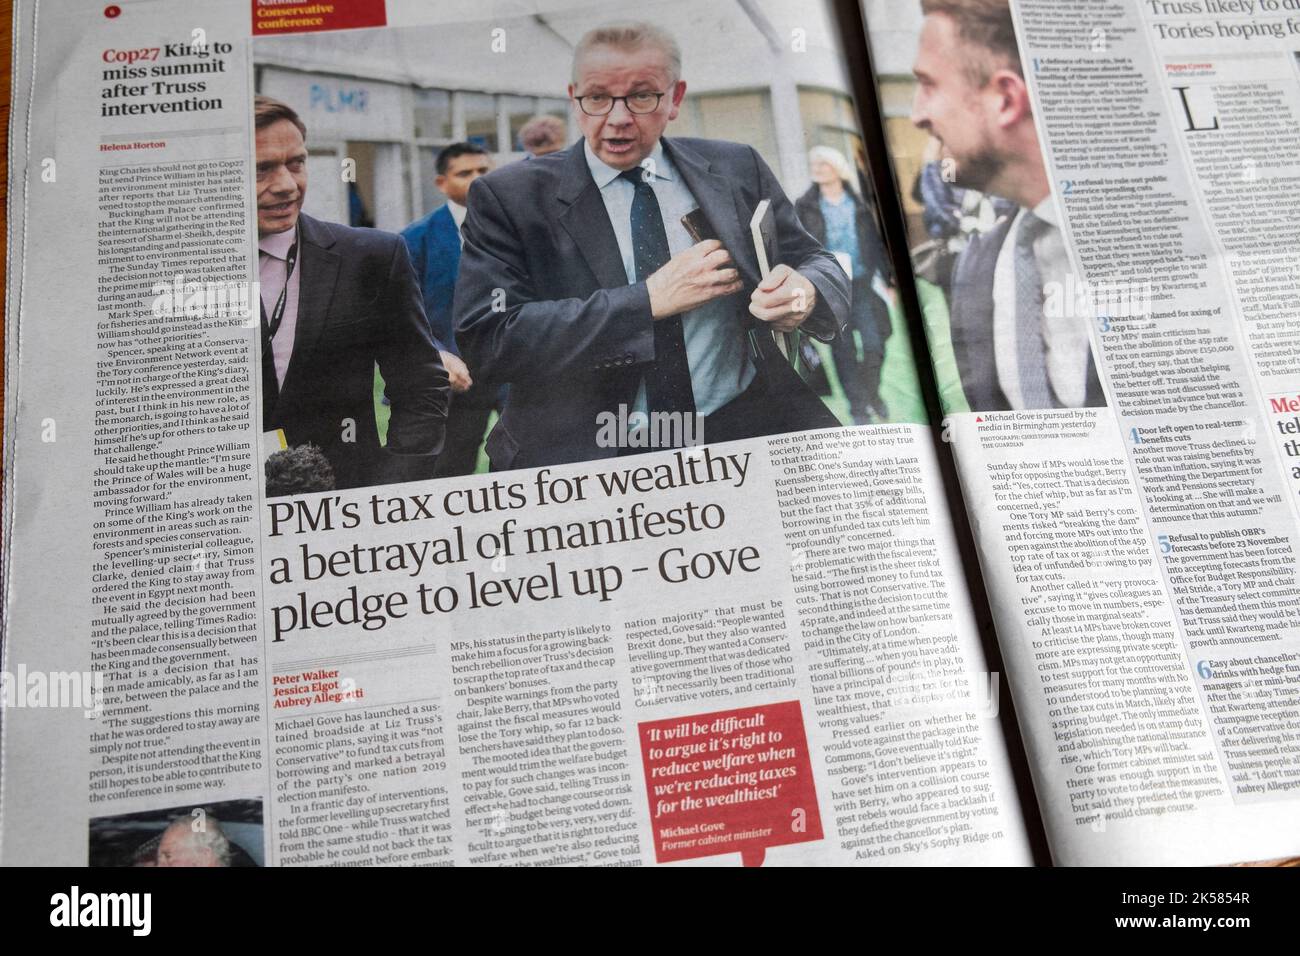 'PM's tax cuts for wealth a betrayal of manifesto pledge to level up - Gove' Guardian front page mini-budget Kwarteng newspaper headline London UK 202 Stock Photo